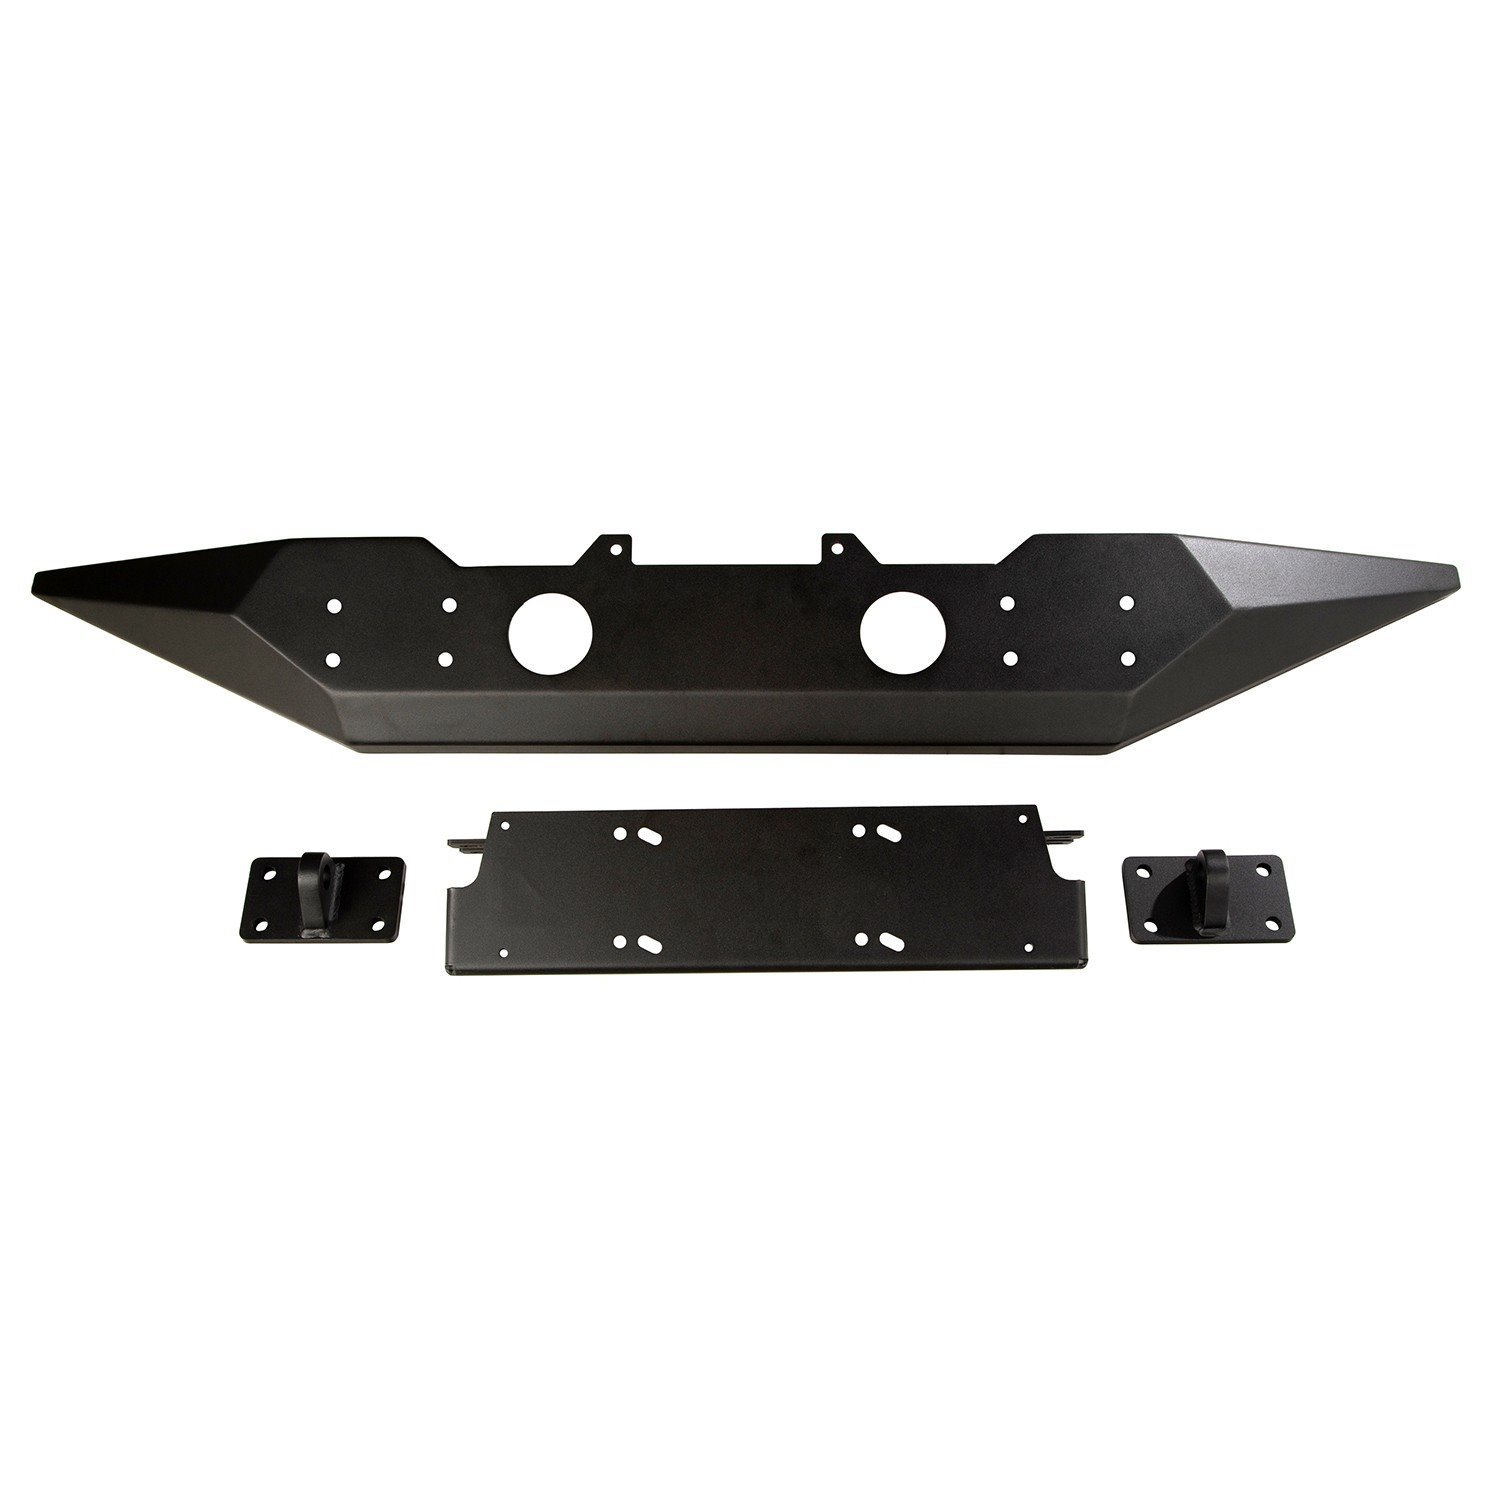 Standard Clearance Spartan Front Bumper Without Overrider for 2018-2019 Jeep Wrangler JL